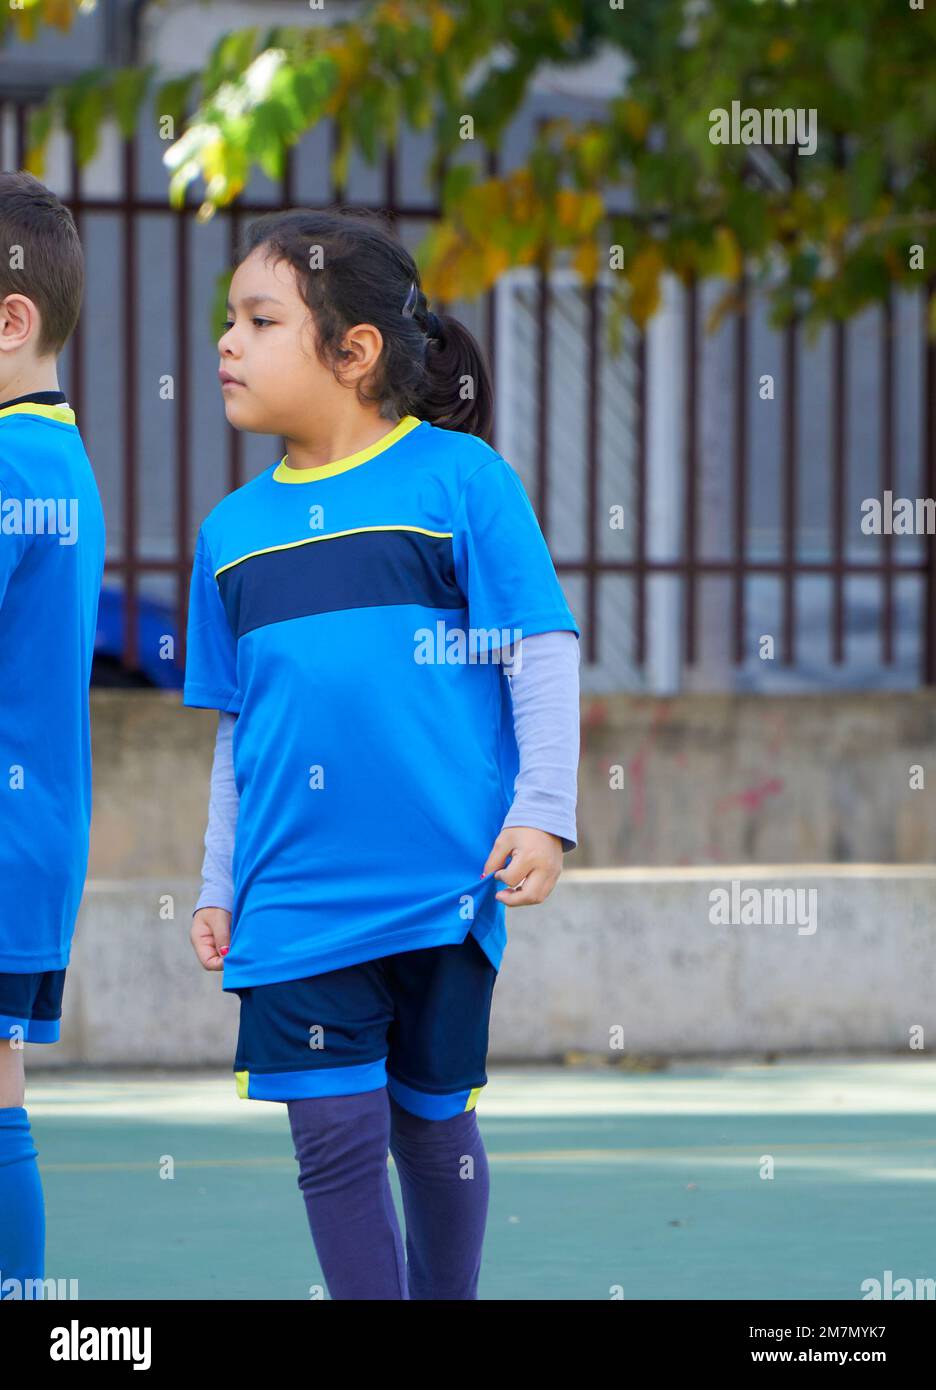 latin girl football player in a sport suit on a soccer field at a elementary children soccer match Stock Photo